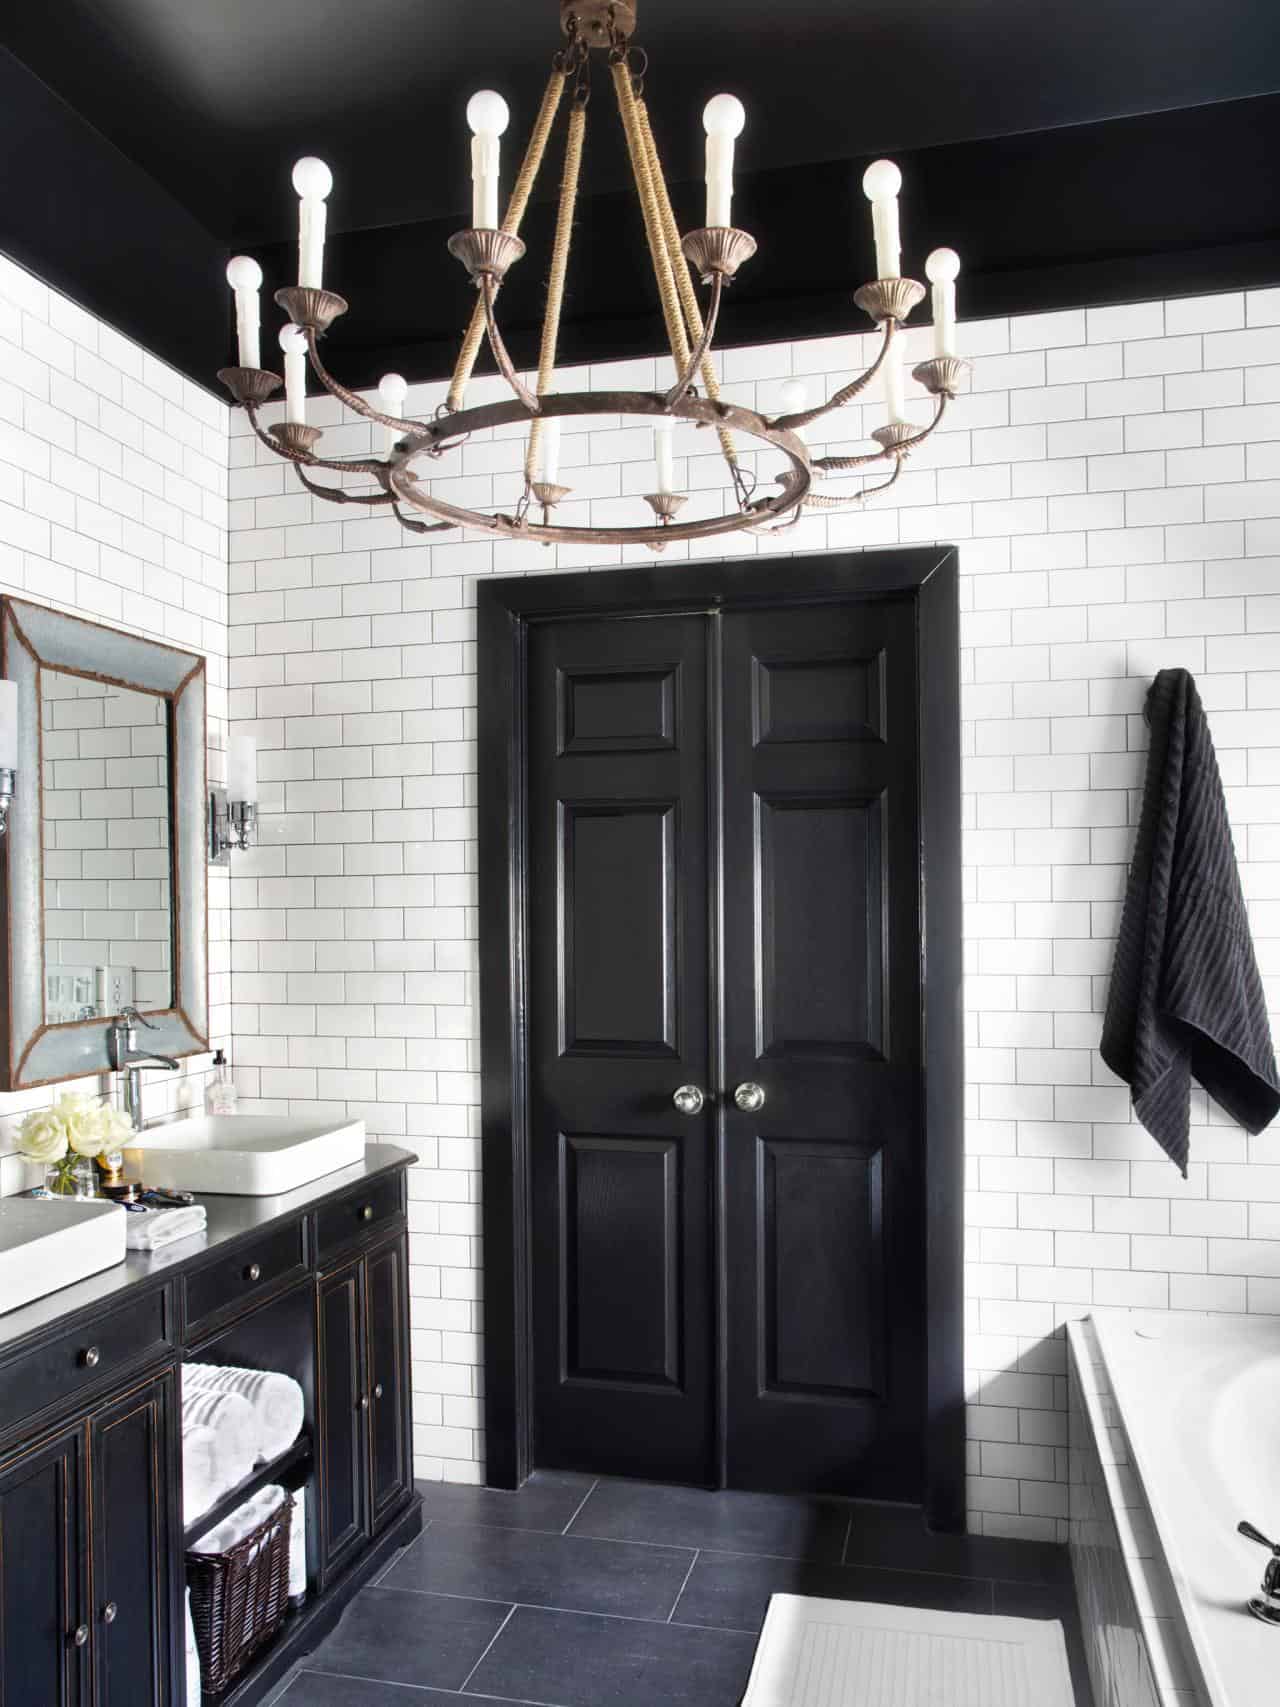 Black And White Bathroom Ideas That Will Never Go Out Of Style,Interior Design Ideas For Large Open Spaces